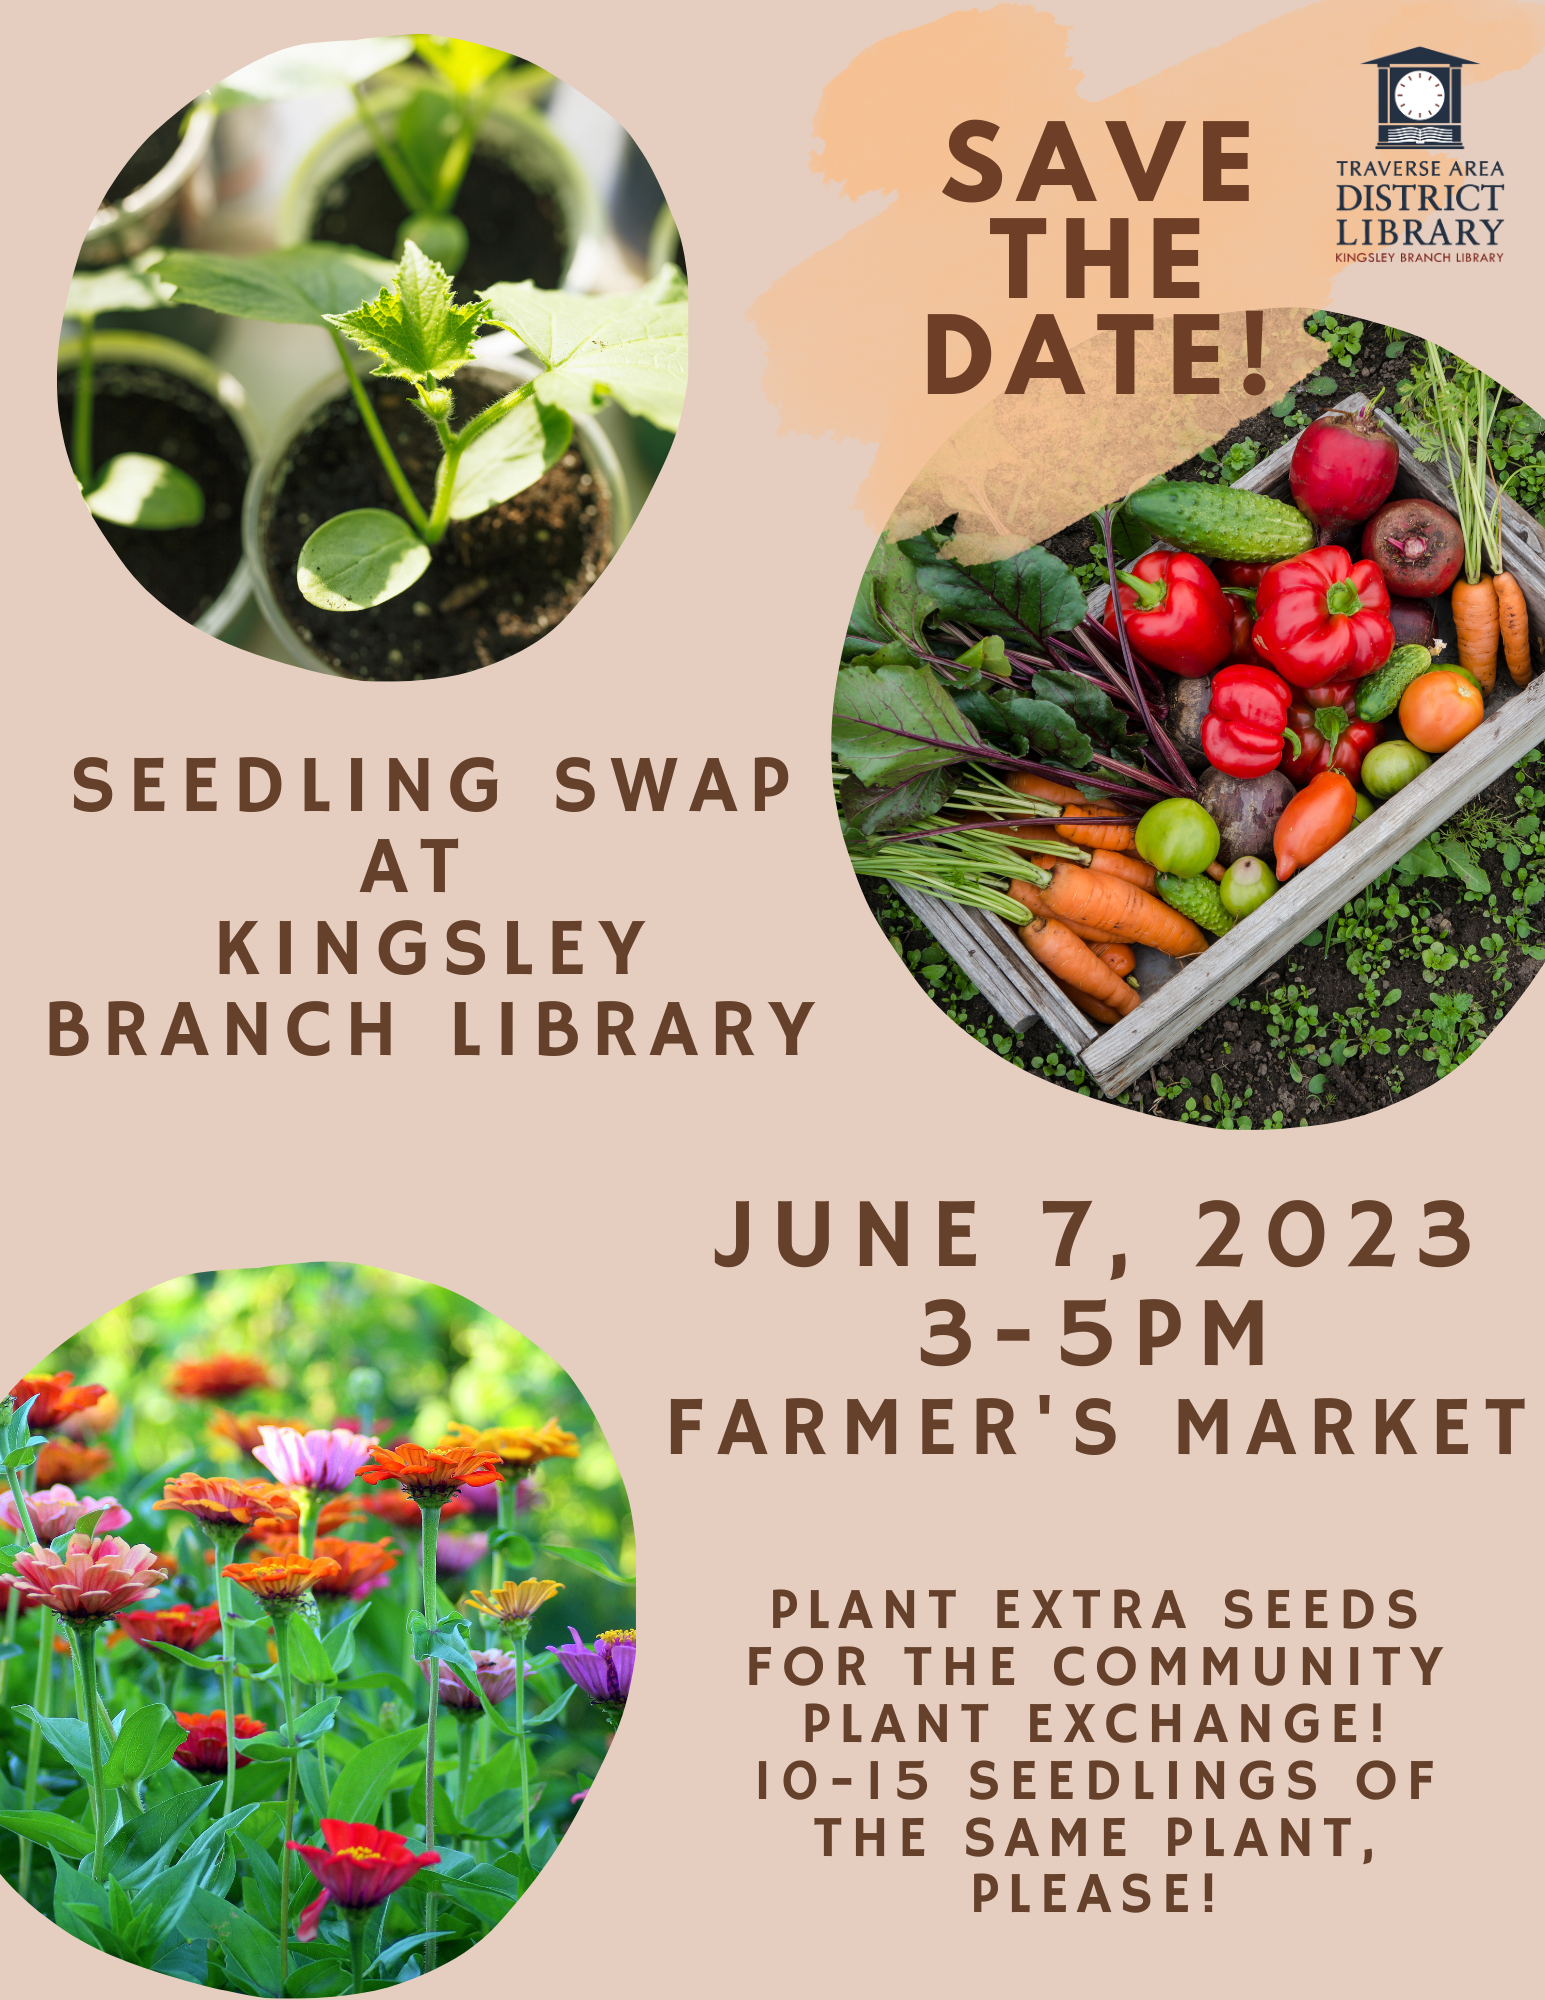 Flyer for event reads save the date, seedling swap at Kingsley Branch Library, June 7h from 3-5pm.